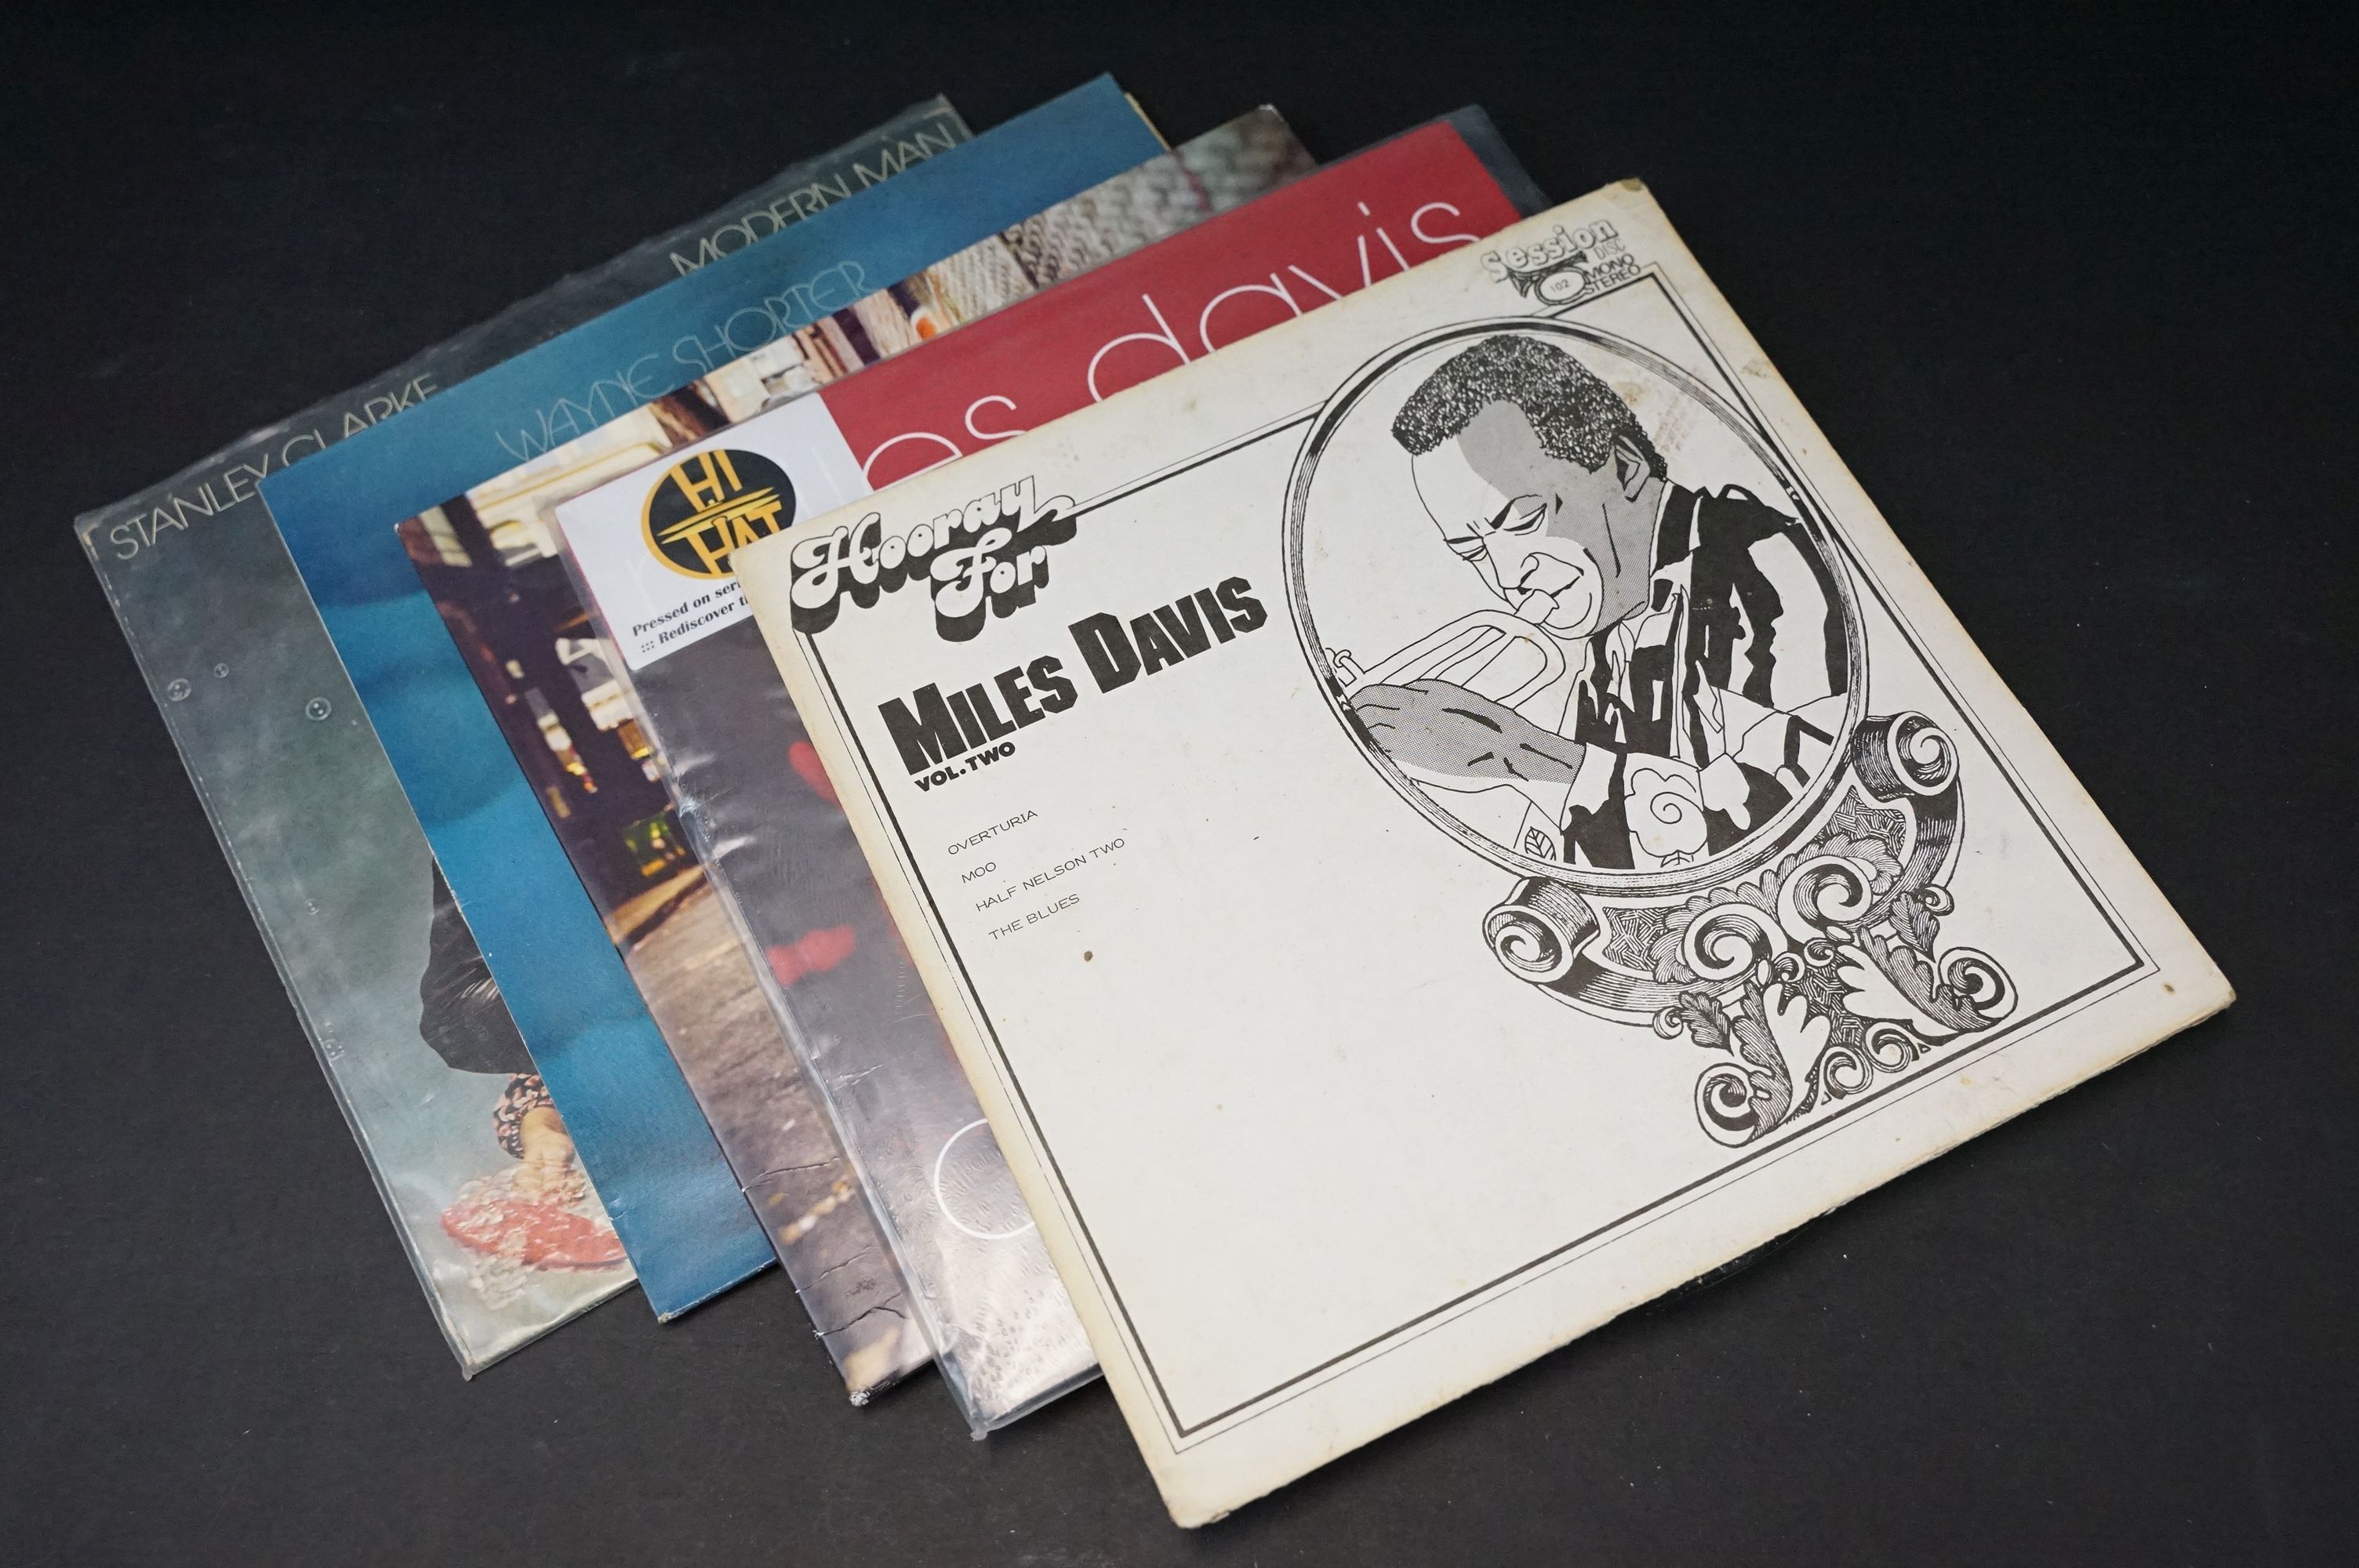 Vinyl / Autographs - 48 Jazz albums and one 12”, most of which are signed, albums to include: - Image 2 of 4